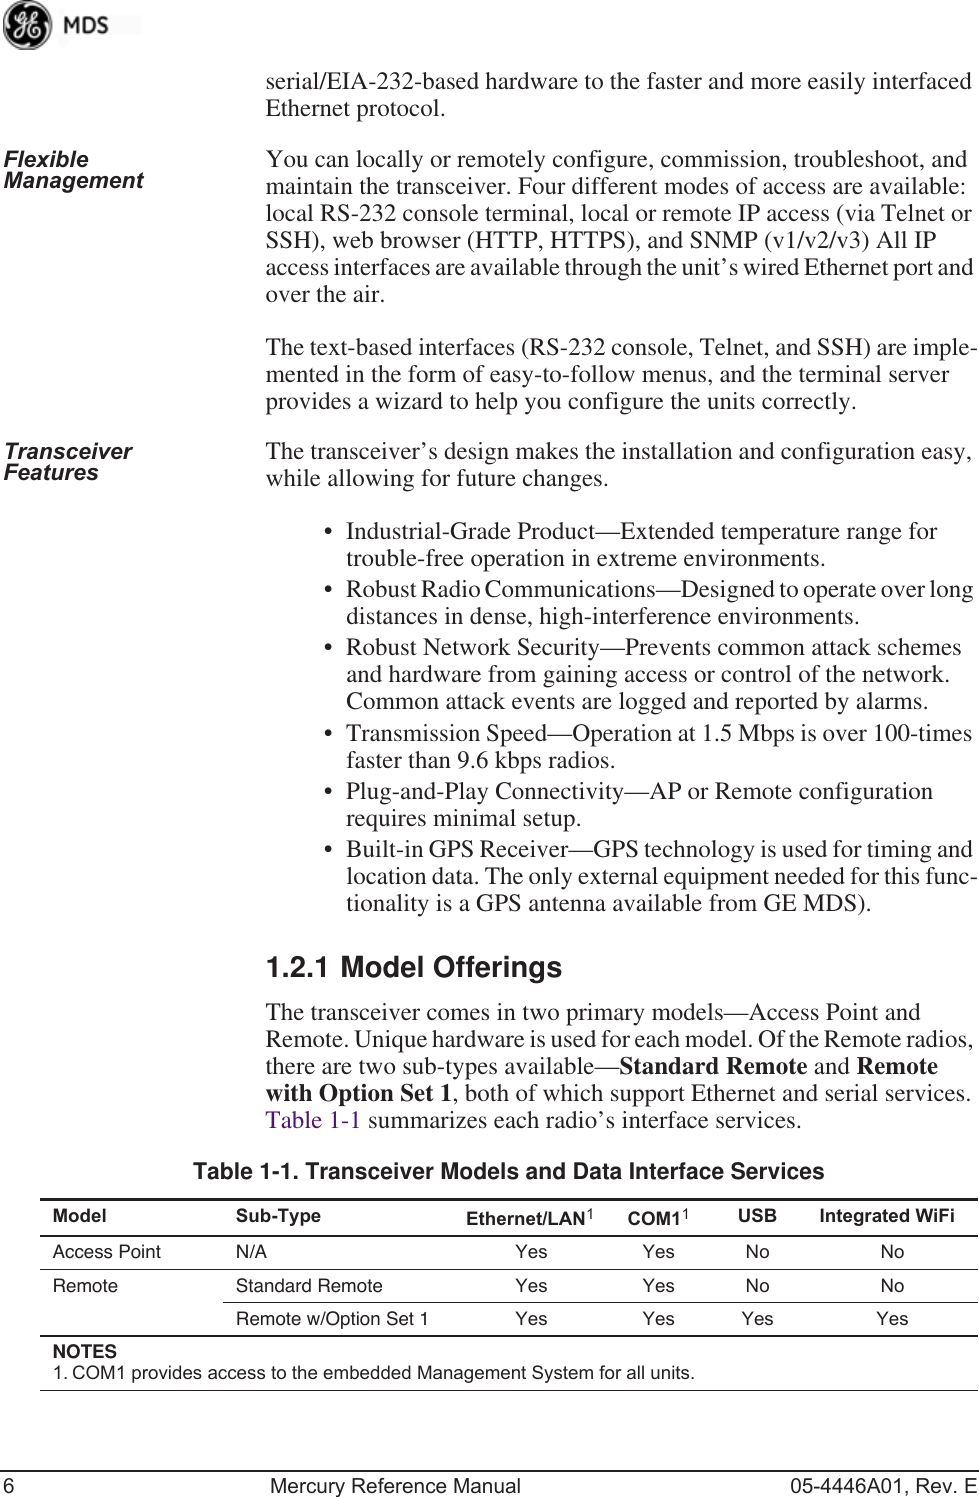 6 Mercury Reference Manual 05-4446A01, Rev. Eserial/EIA-232-based hardware to the faster and more easily interfaced Ethernet protocol.Flexible Management You can locally or remotely configure, commission, troubleshoot, and maintain the transceiver. Four different modes of access are available: local RS-232 console terminal, local or remote IP access (via Telnet or SSH), web browser (HTTP, HTTPS), and SNMP (v1/v2/v3) All IP access interfaces are available through the unit’s wired Ethernet port and over the air.The text-based interfaces (RS-232 console, Telnet, and SSH) are imple-mented in the form of easy-to-follow menus, and the terminal server provides a wizard to help you configure the units correctly.Transceiver Features The transceiver’s design makes the installation and configuration easy, while allowing for future changes.• Industrial-Grade Product—Extended temperature range for trouble-free operation in extreme environments.• Robust Radio Communications—Designed to operate over long distances in dense, high-interference environments.• Robust Network Security—Prevents common attack schemes and hardware from gaining access or control of the network. Common attack events are logged and reported by alarms.• Transmission Speed—Operation at 1.5 Mbps is over 100-times faster than 9.6 kbps radios.• Plug-and-Play Connectivity—AP or Remote configuration requires minimal setup.• Built-in GPS Receiver—GPS technology is used for timing and location data. The only external equipment needed for this func-tionality is a GPS antenna available from GE MDS).1.2.1 Model OfferingsThe transceiver comes in two primary models—Access Point and Remote. Unique hardware is used for each model. Of the Remote radios, there are two sub-types available—Standard Remote and Remote with Option Set 1, both of which support Ethernet and serial services. Table 1-1 summarizes each radio’s interface services.Table 1-1. Transceiver Models and Data Interface ServicesModel Sub-Type Ethernet/LAN1COM11USB Integrated WiFiAccess Point N/A Yes Yes No NoRemote Standard Remote Yes Yes No NoRemote w/Option Set 1 Yes Yes Yes YesNOTES 1. COM1 provides access to the embedded Management System for all units.